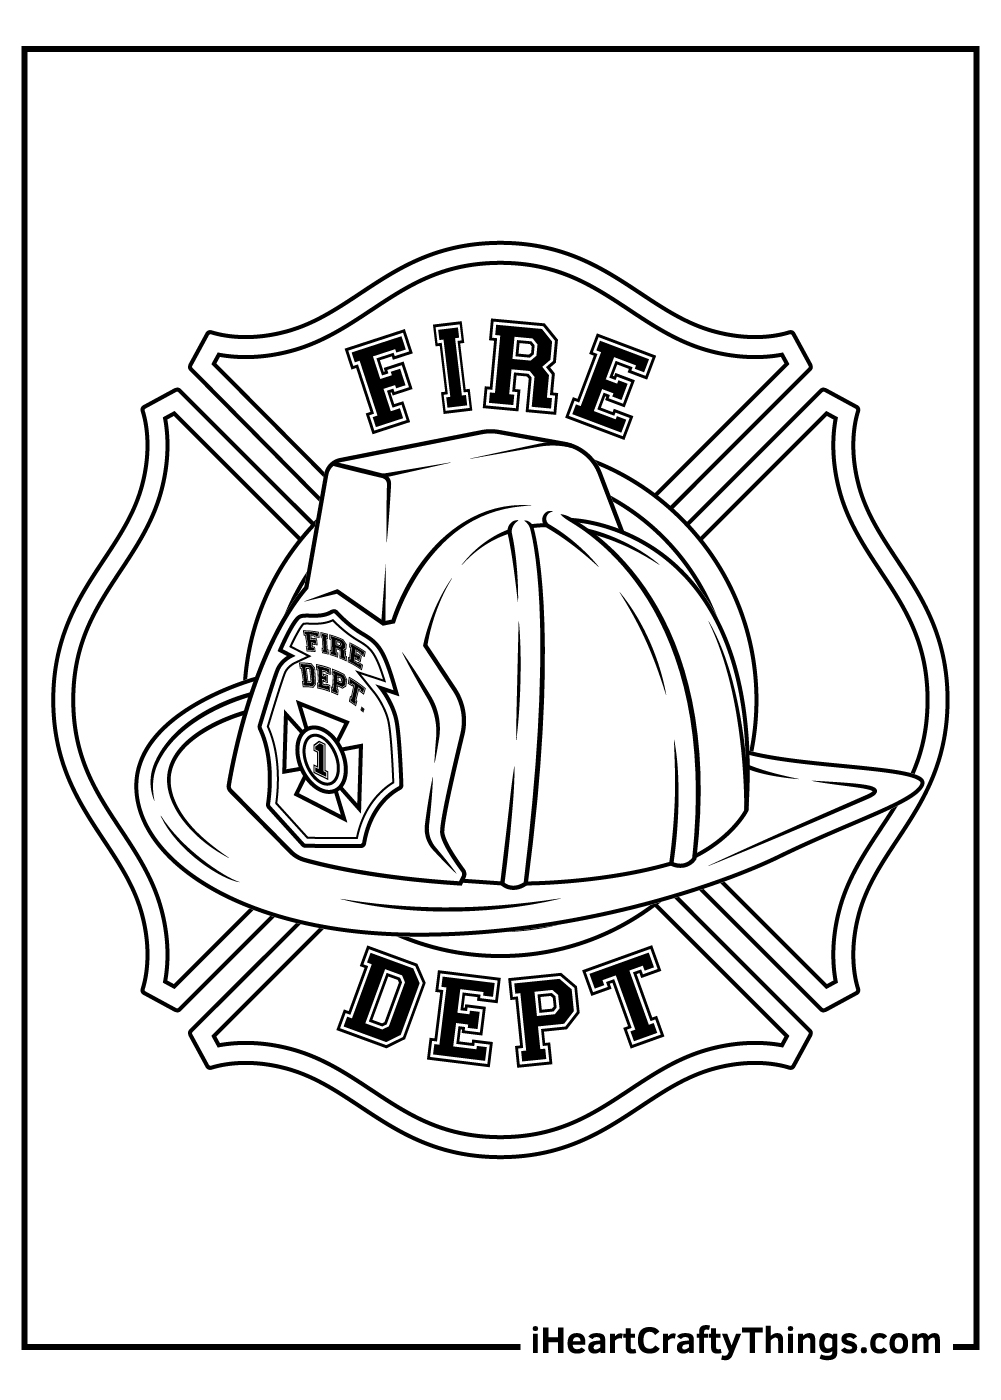 Printable Fire Department Coloring Pages Updated 20